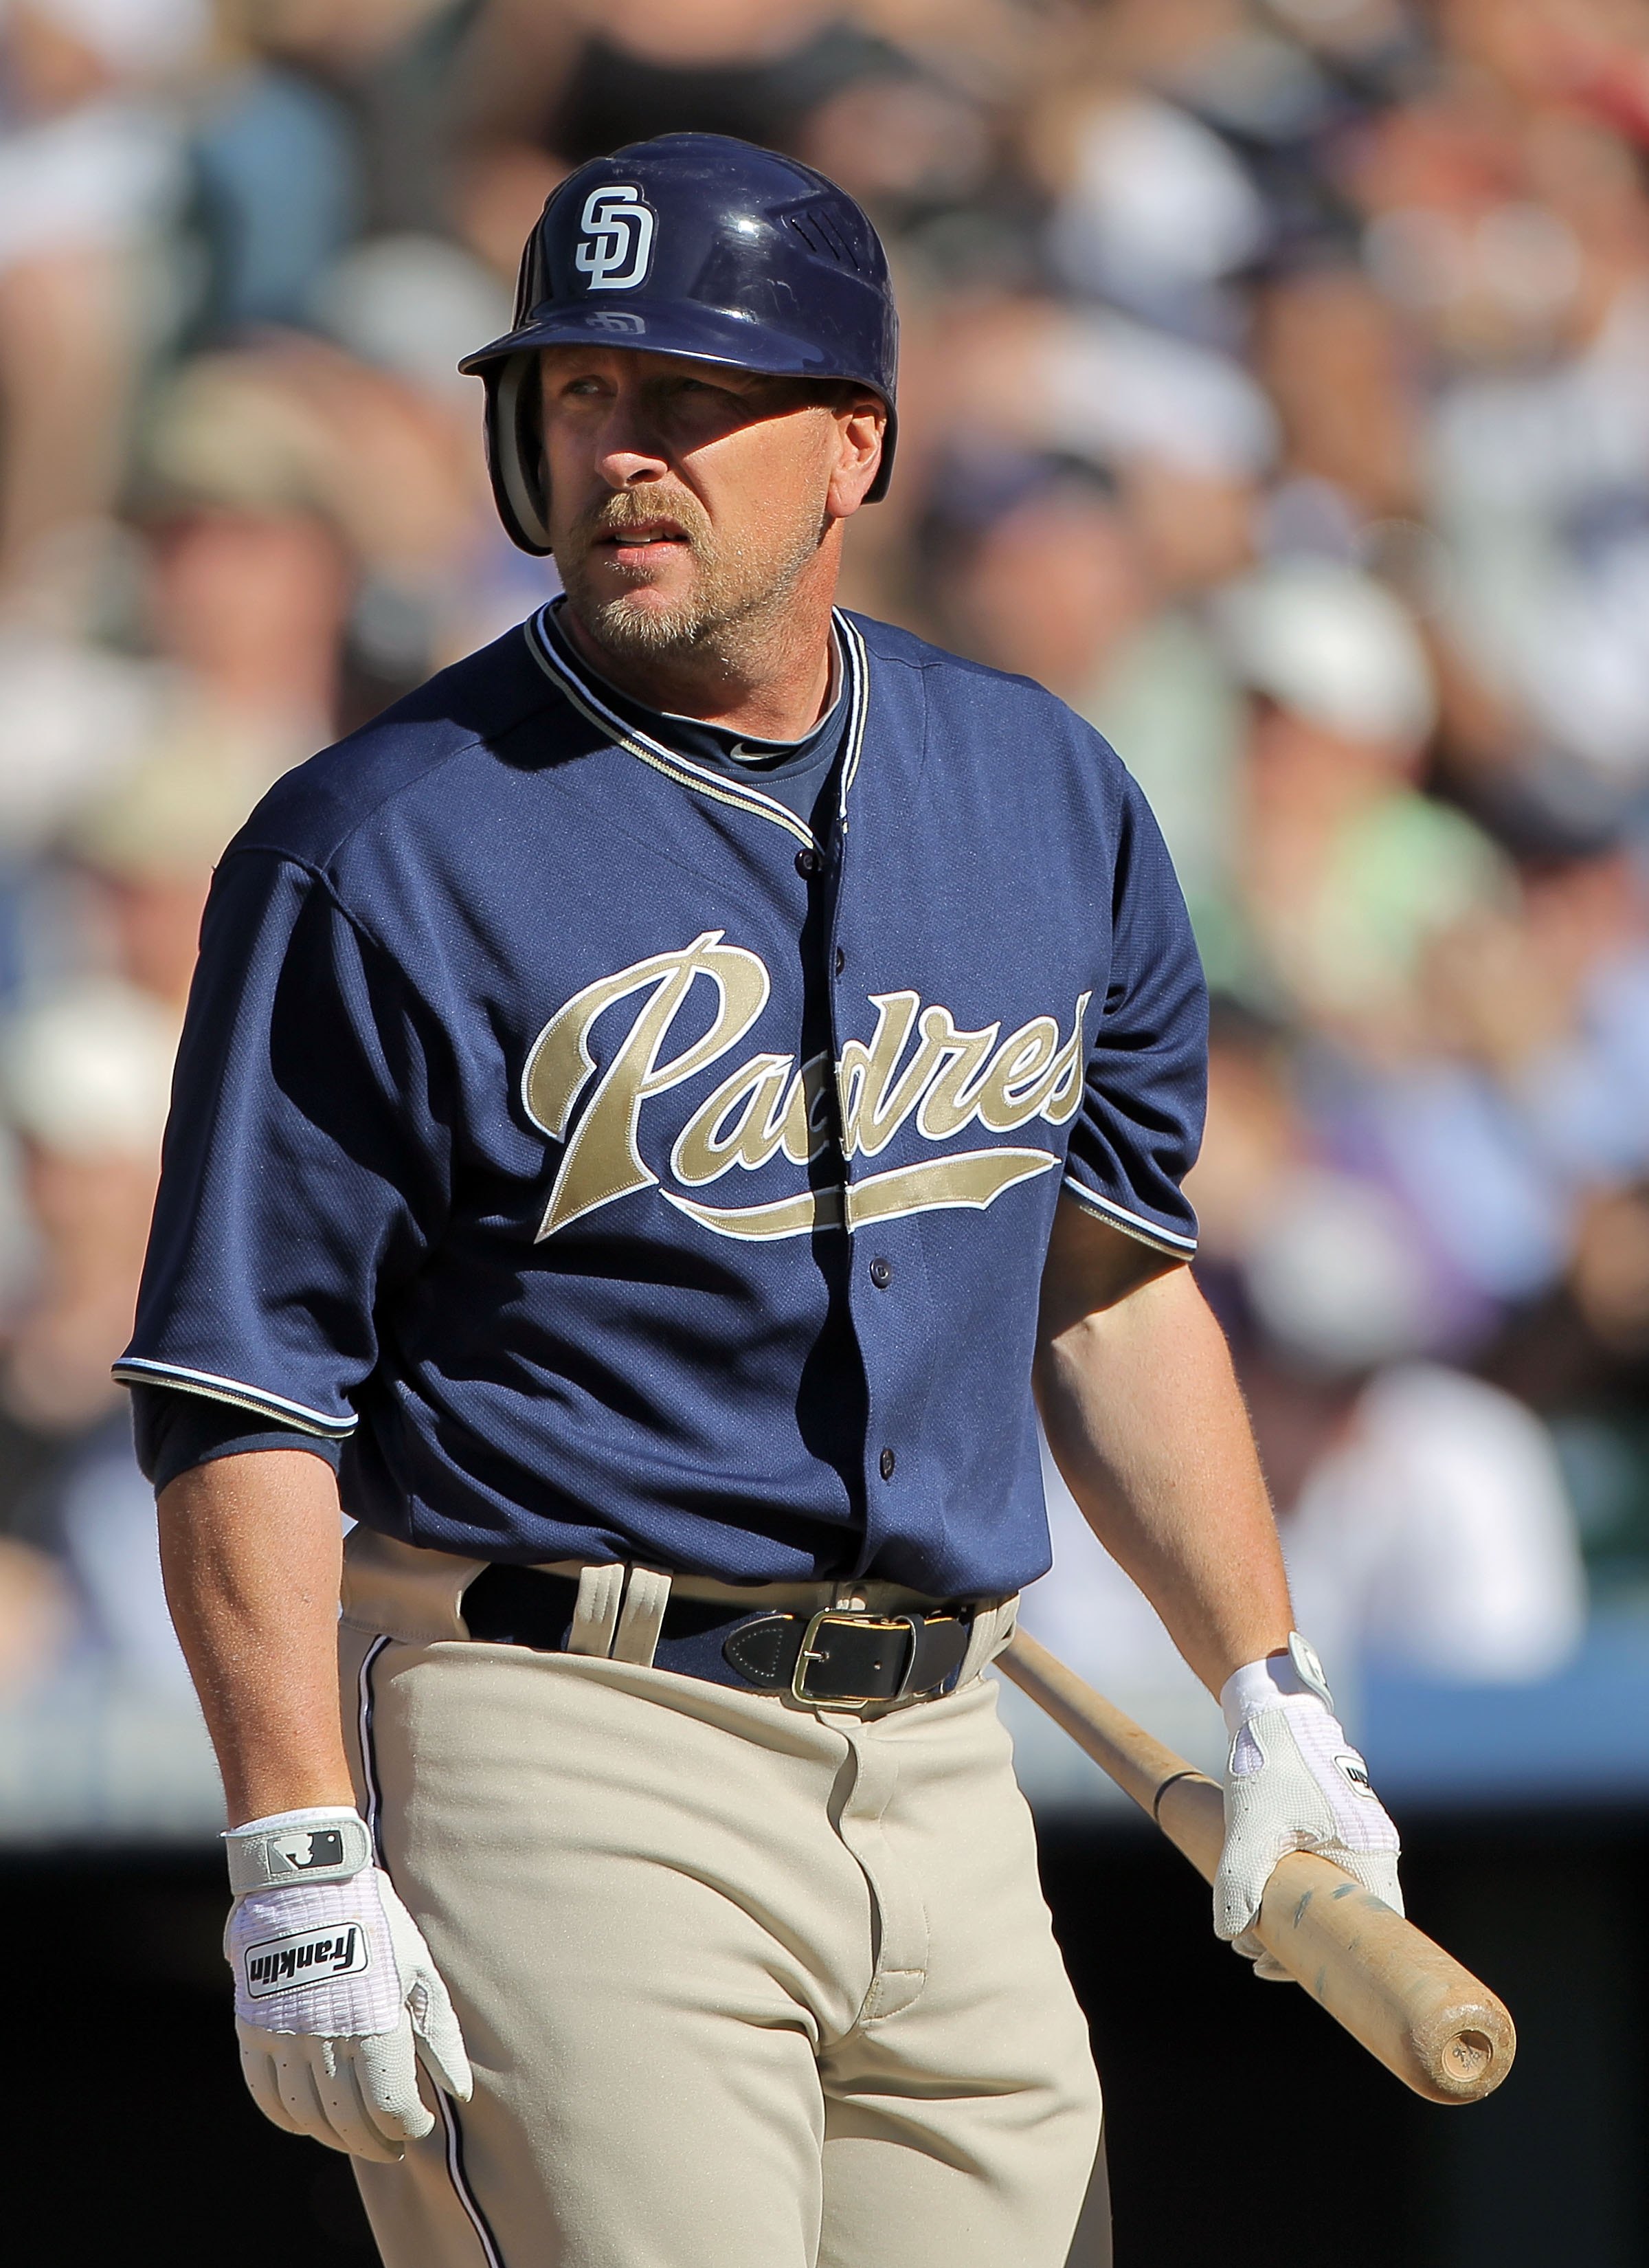 DENVER - APRIL 09:  Matt Stairs #16 of the San Diego Padres pinch hits against the Colorado Rockies during MLB action on Opening Day at Coors Field on April 9, 2010 in Denver, Colorado. The Rockies defeated the Padres 7-0.  (Photo by Doug Pensinger/Getty